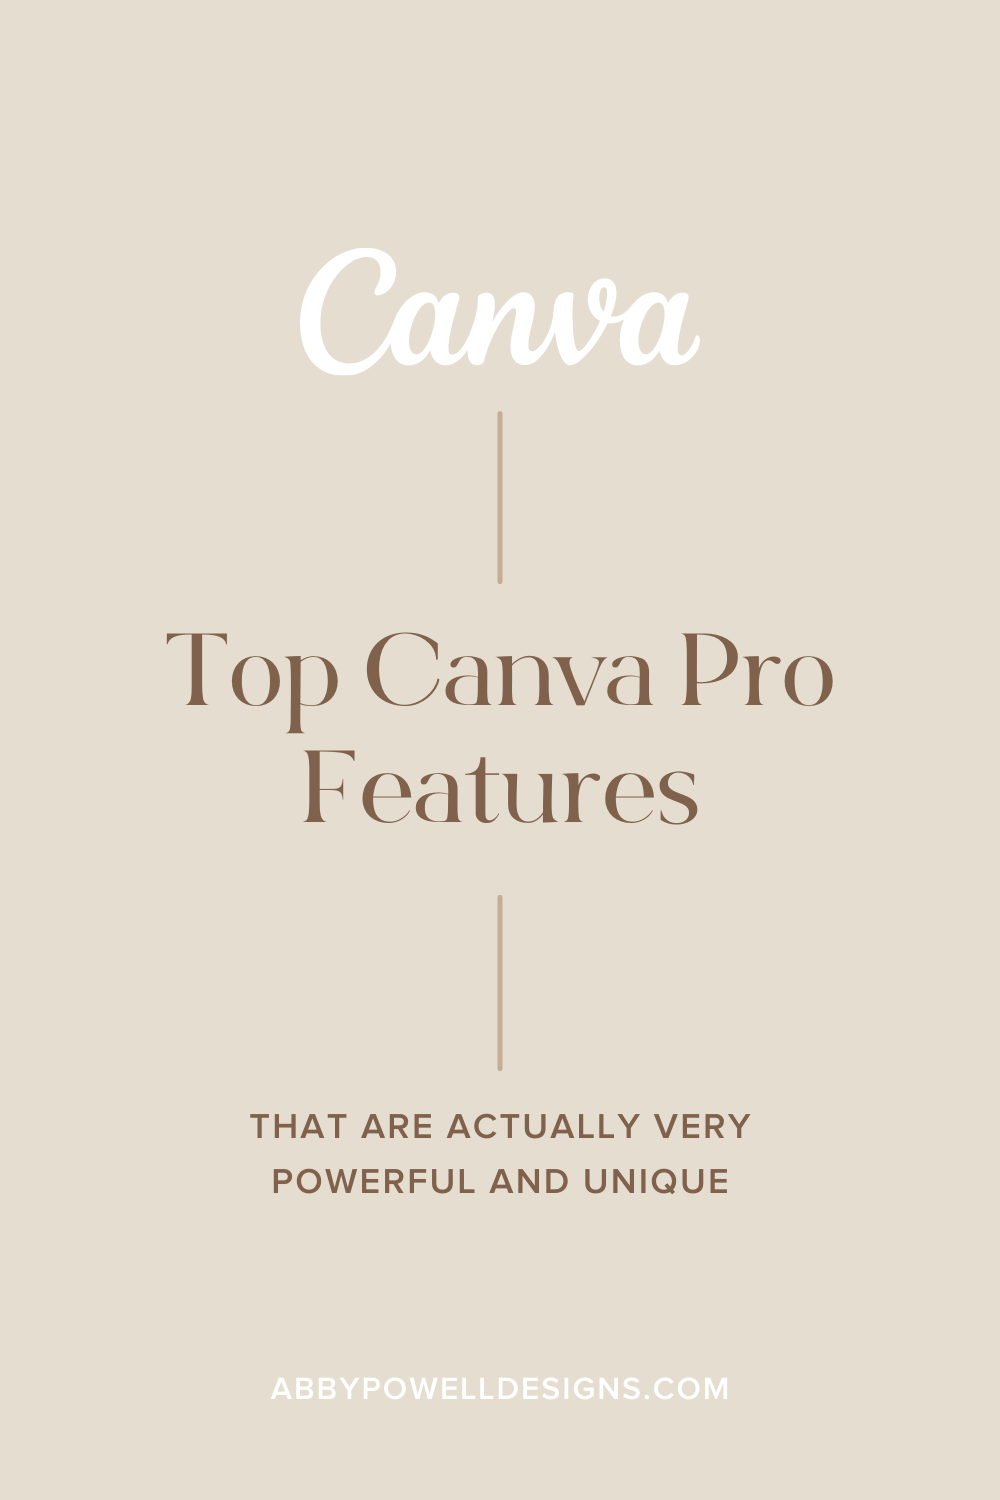 Learn the best features of Canva Pro and start using for FREE.